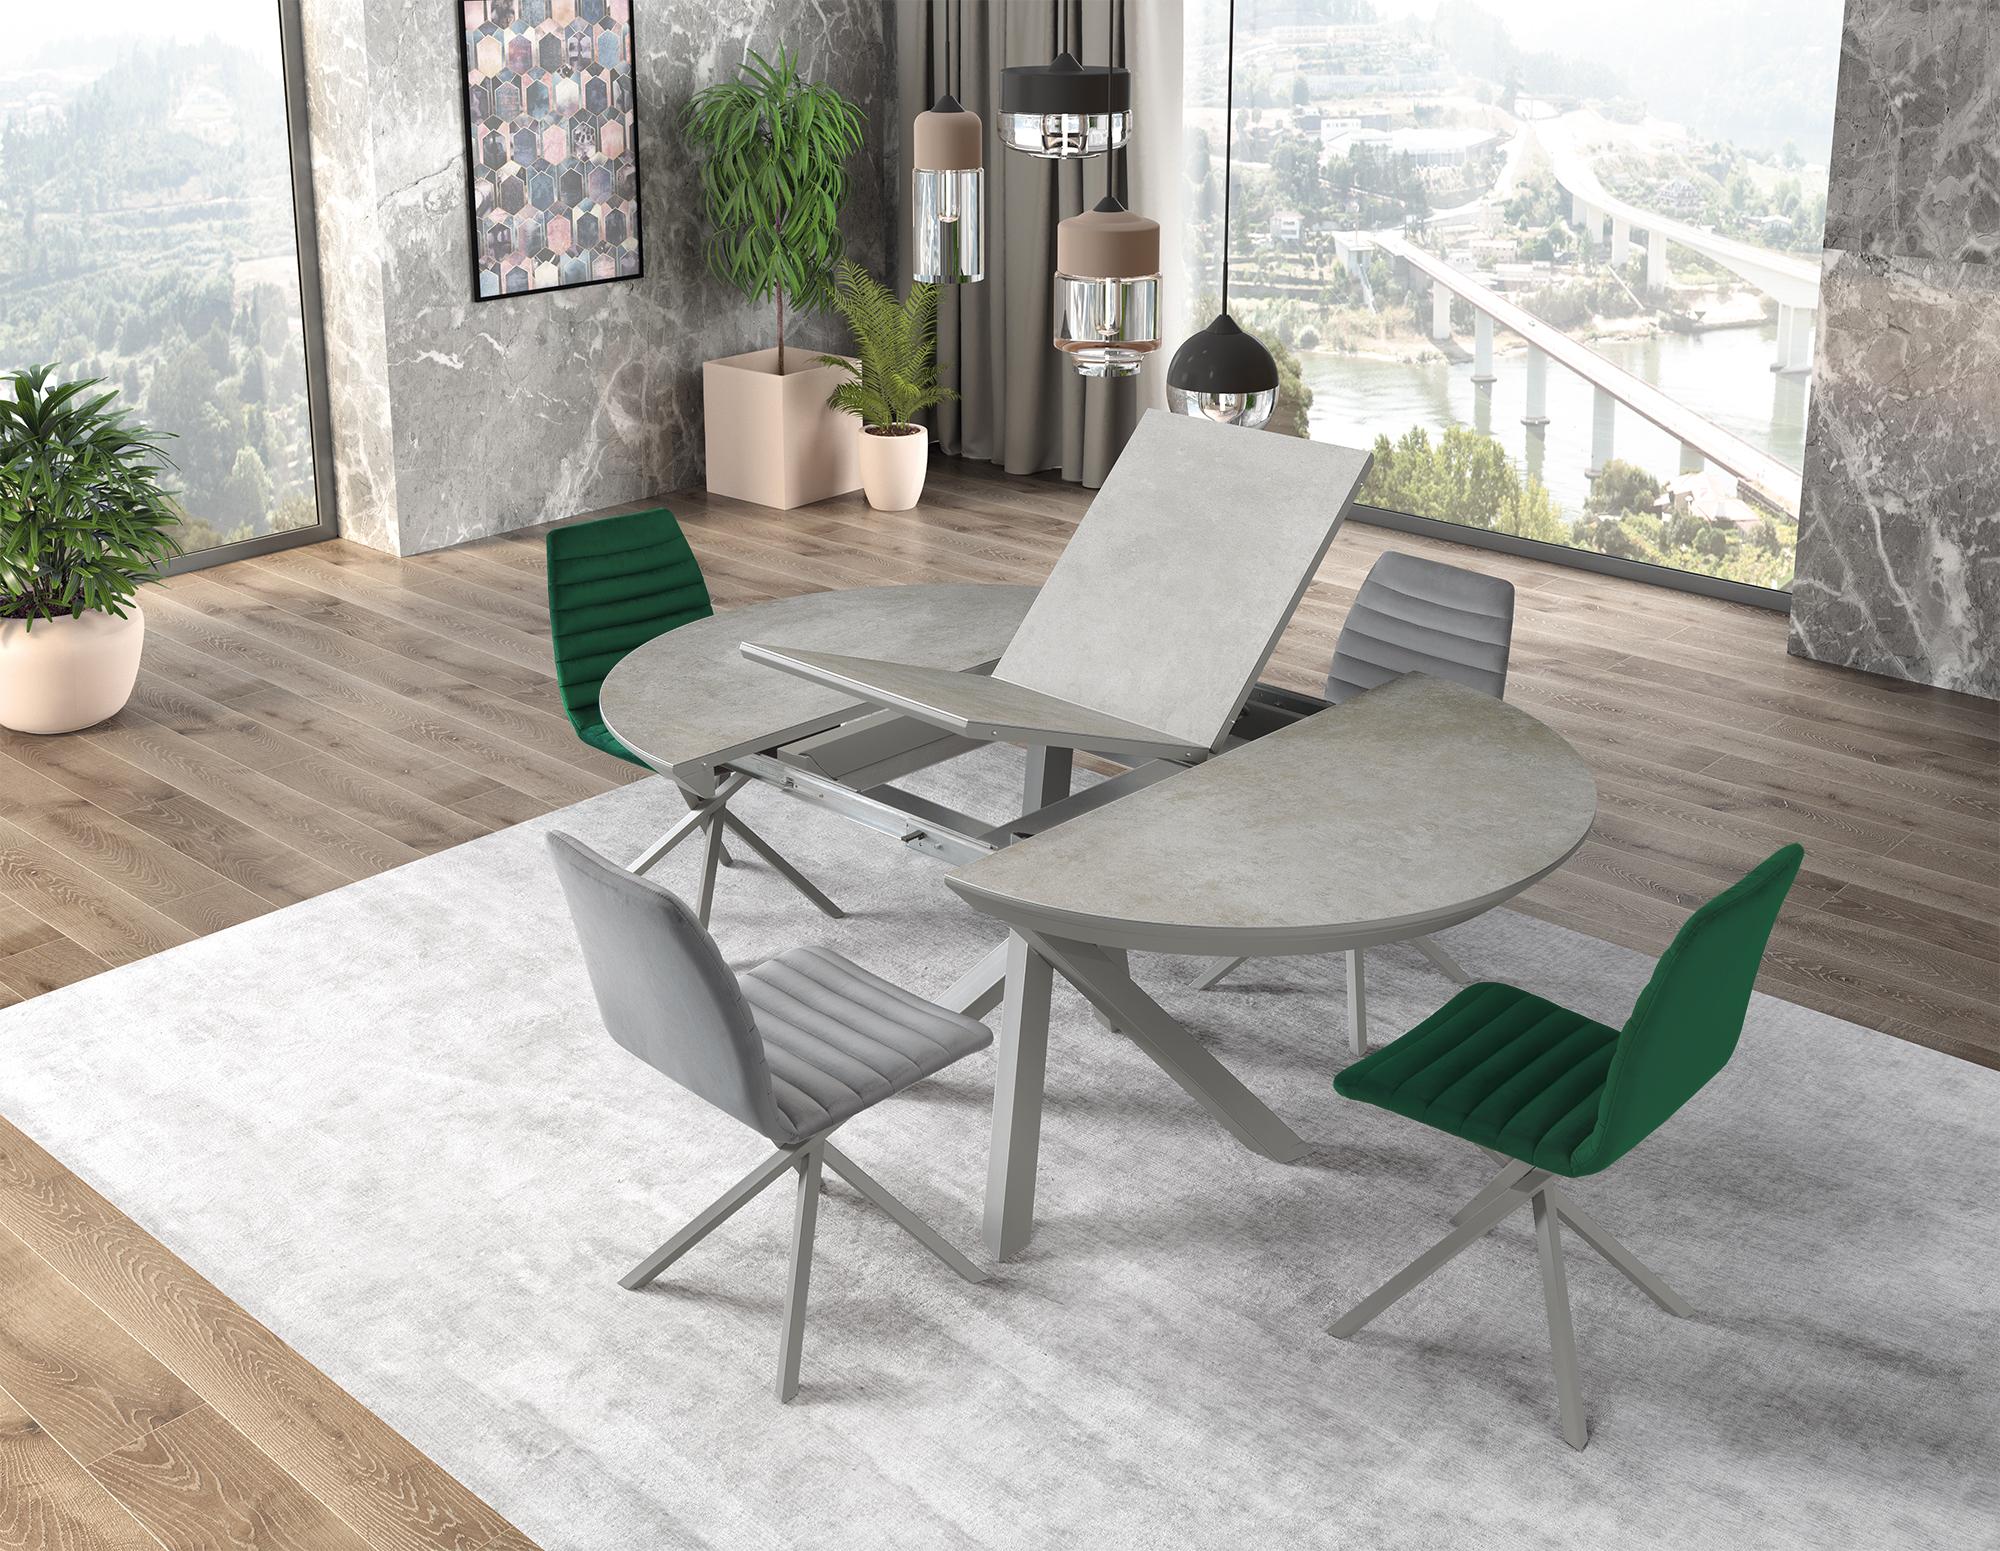 Size: D:120cm W:120cm H:77cm  extentable with 50cm
Materials: legs in lacquered metal, any color, top in ceramic

Puzzle extendable round dining table, which is 100% produced in Portugal, Europe, is available in different sizes and shapes: Oval,